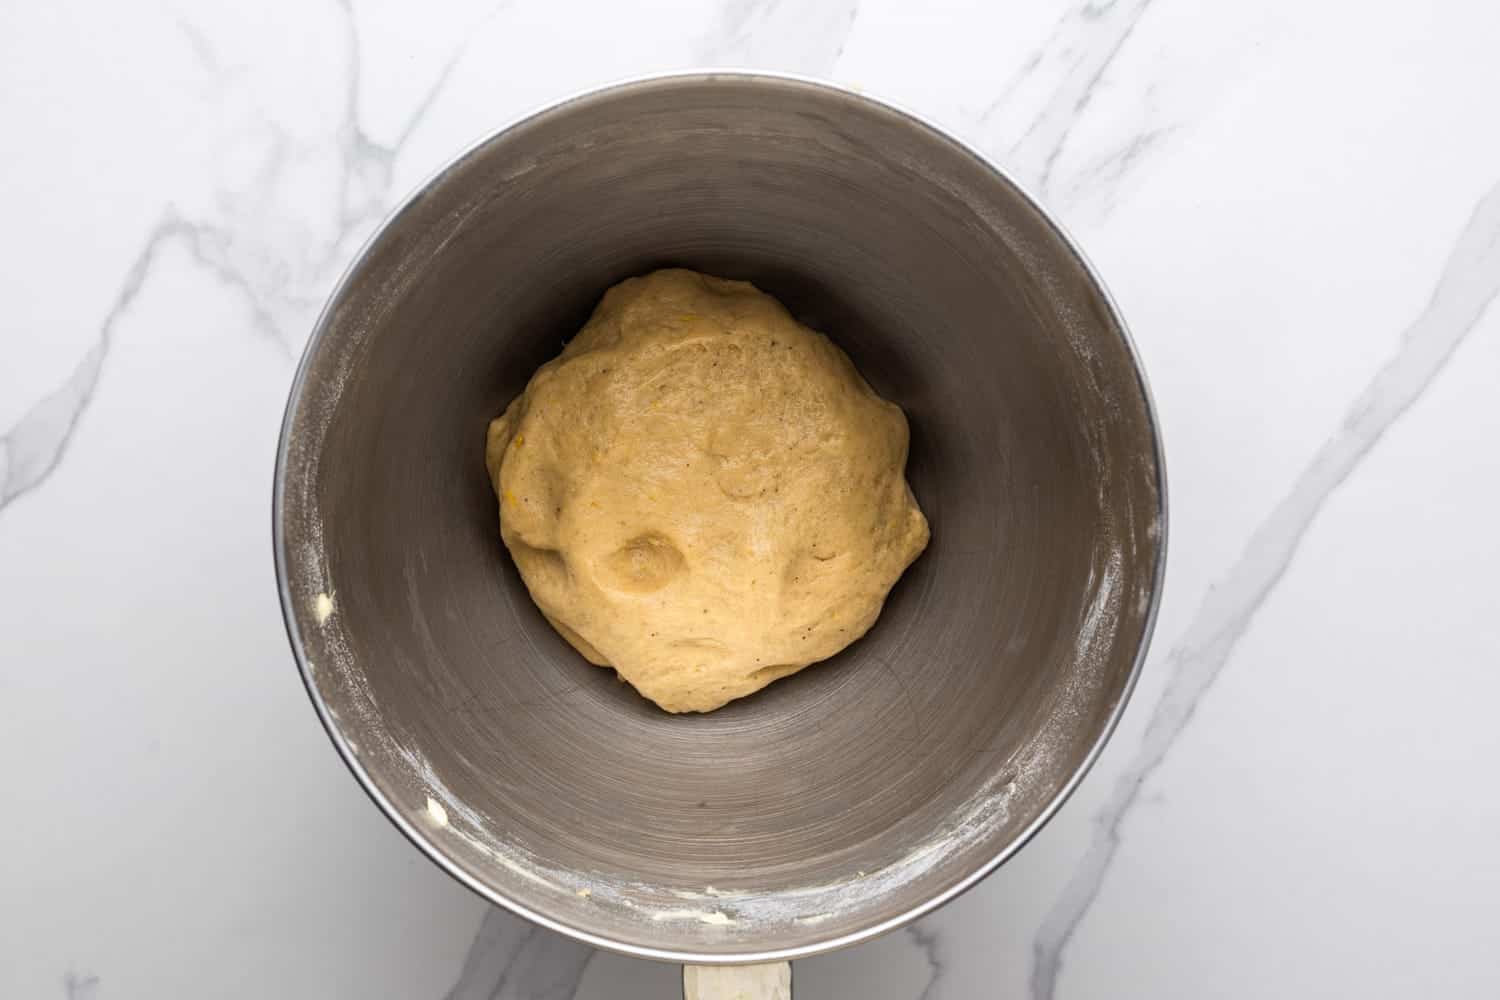 stollen dough in the metal bowl of a stand mixer.